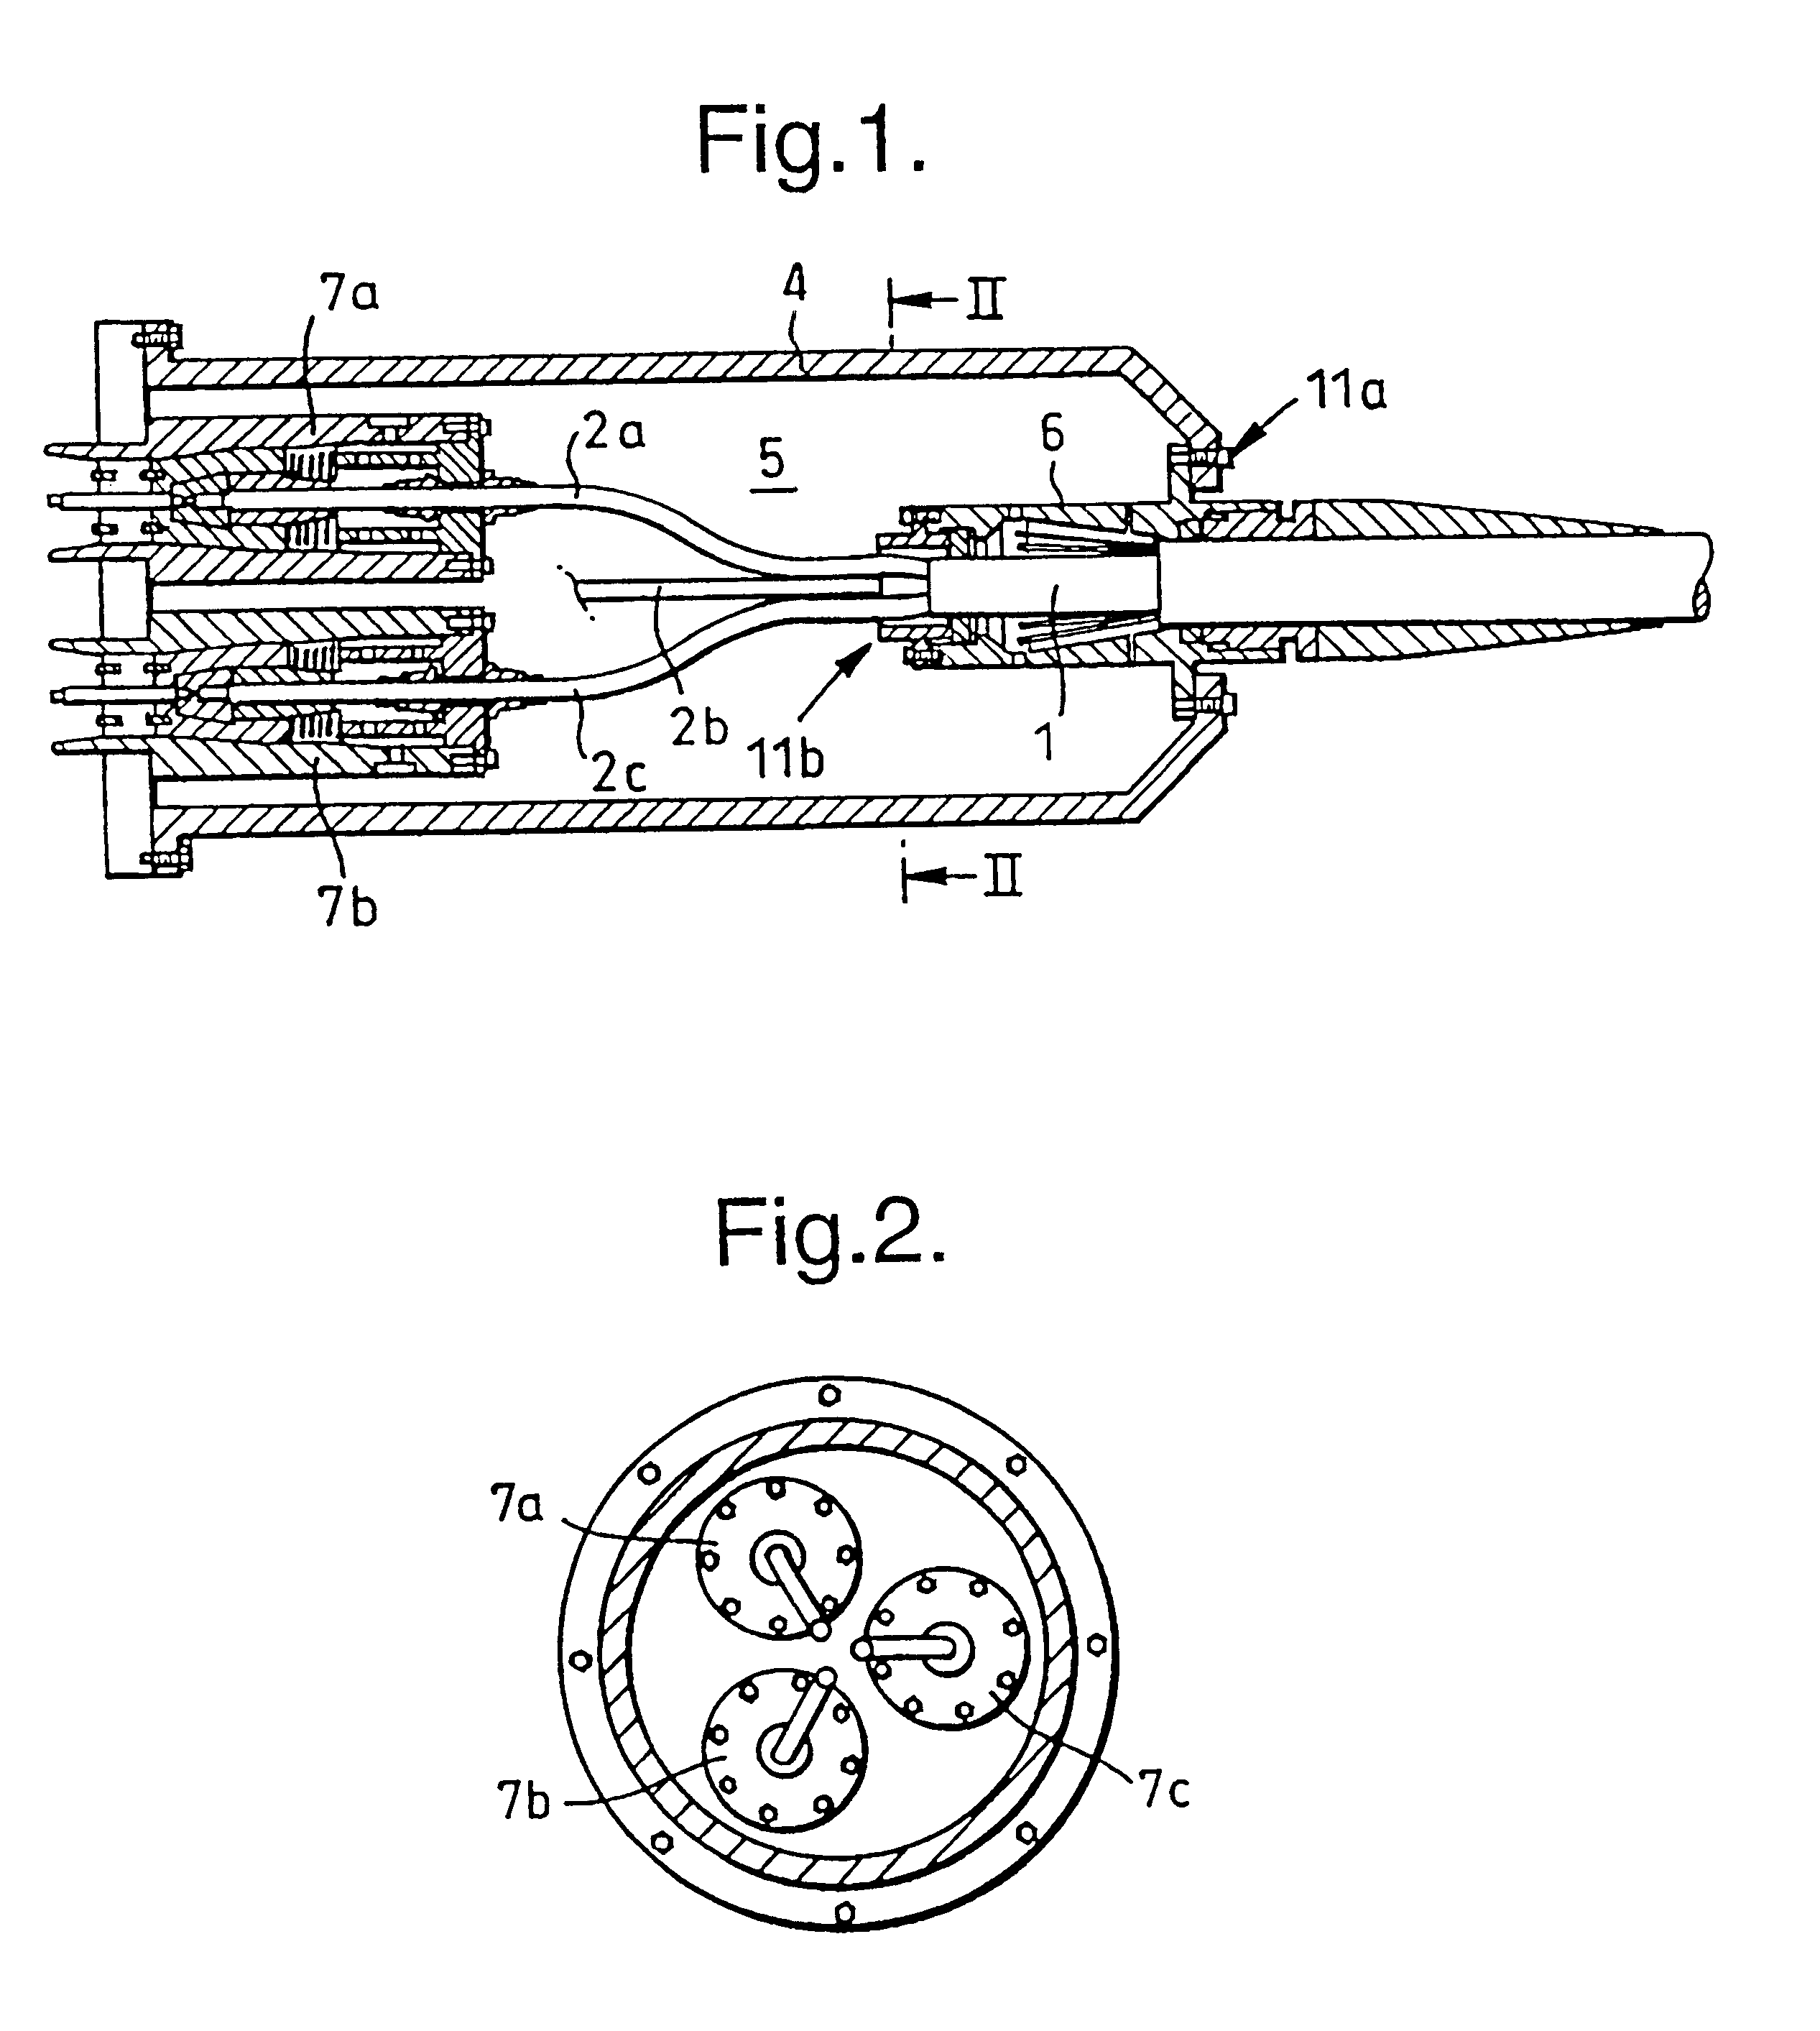 Arrangement in terminating a cable